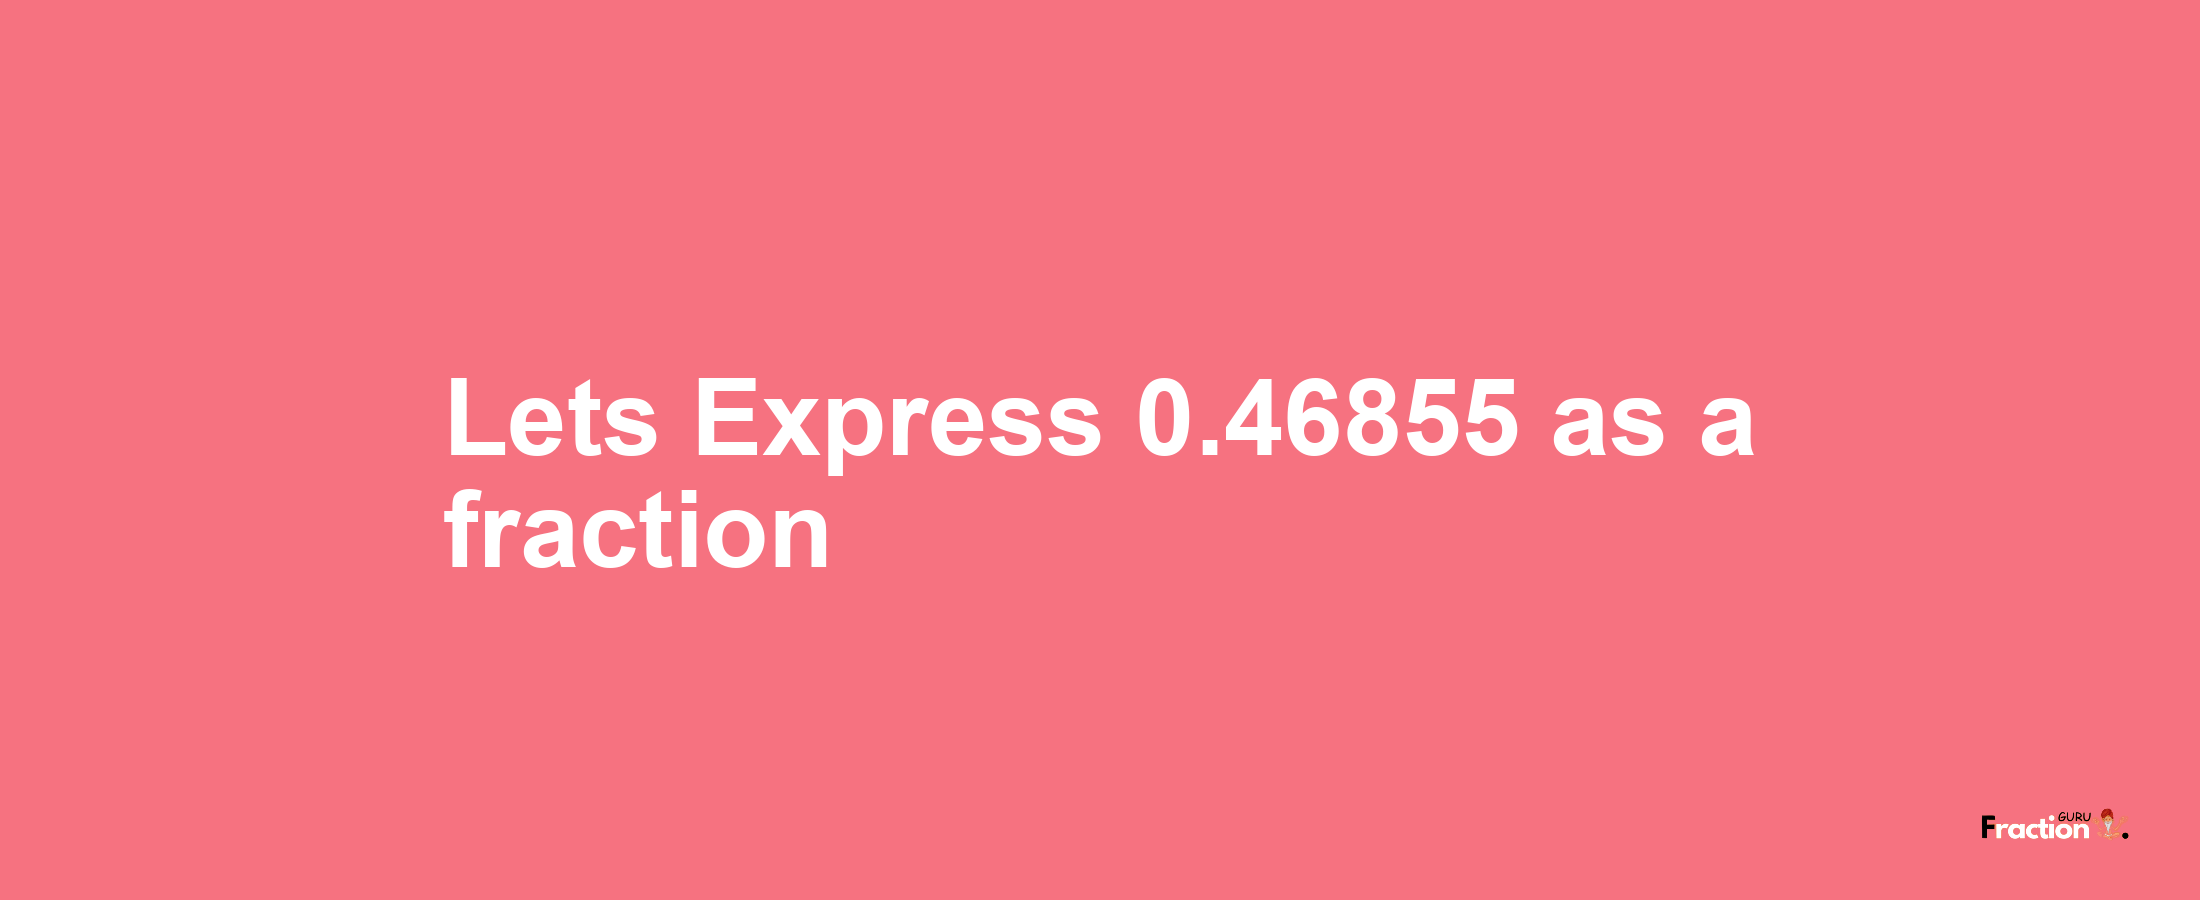 Lets Express 0.46855 as afraction